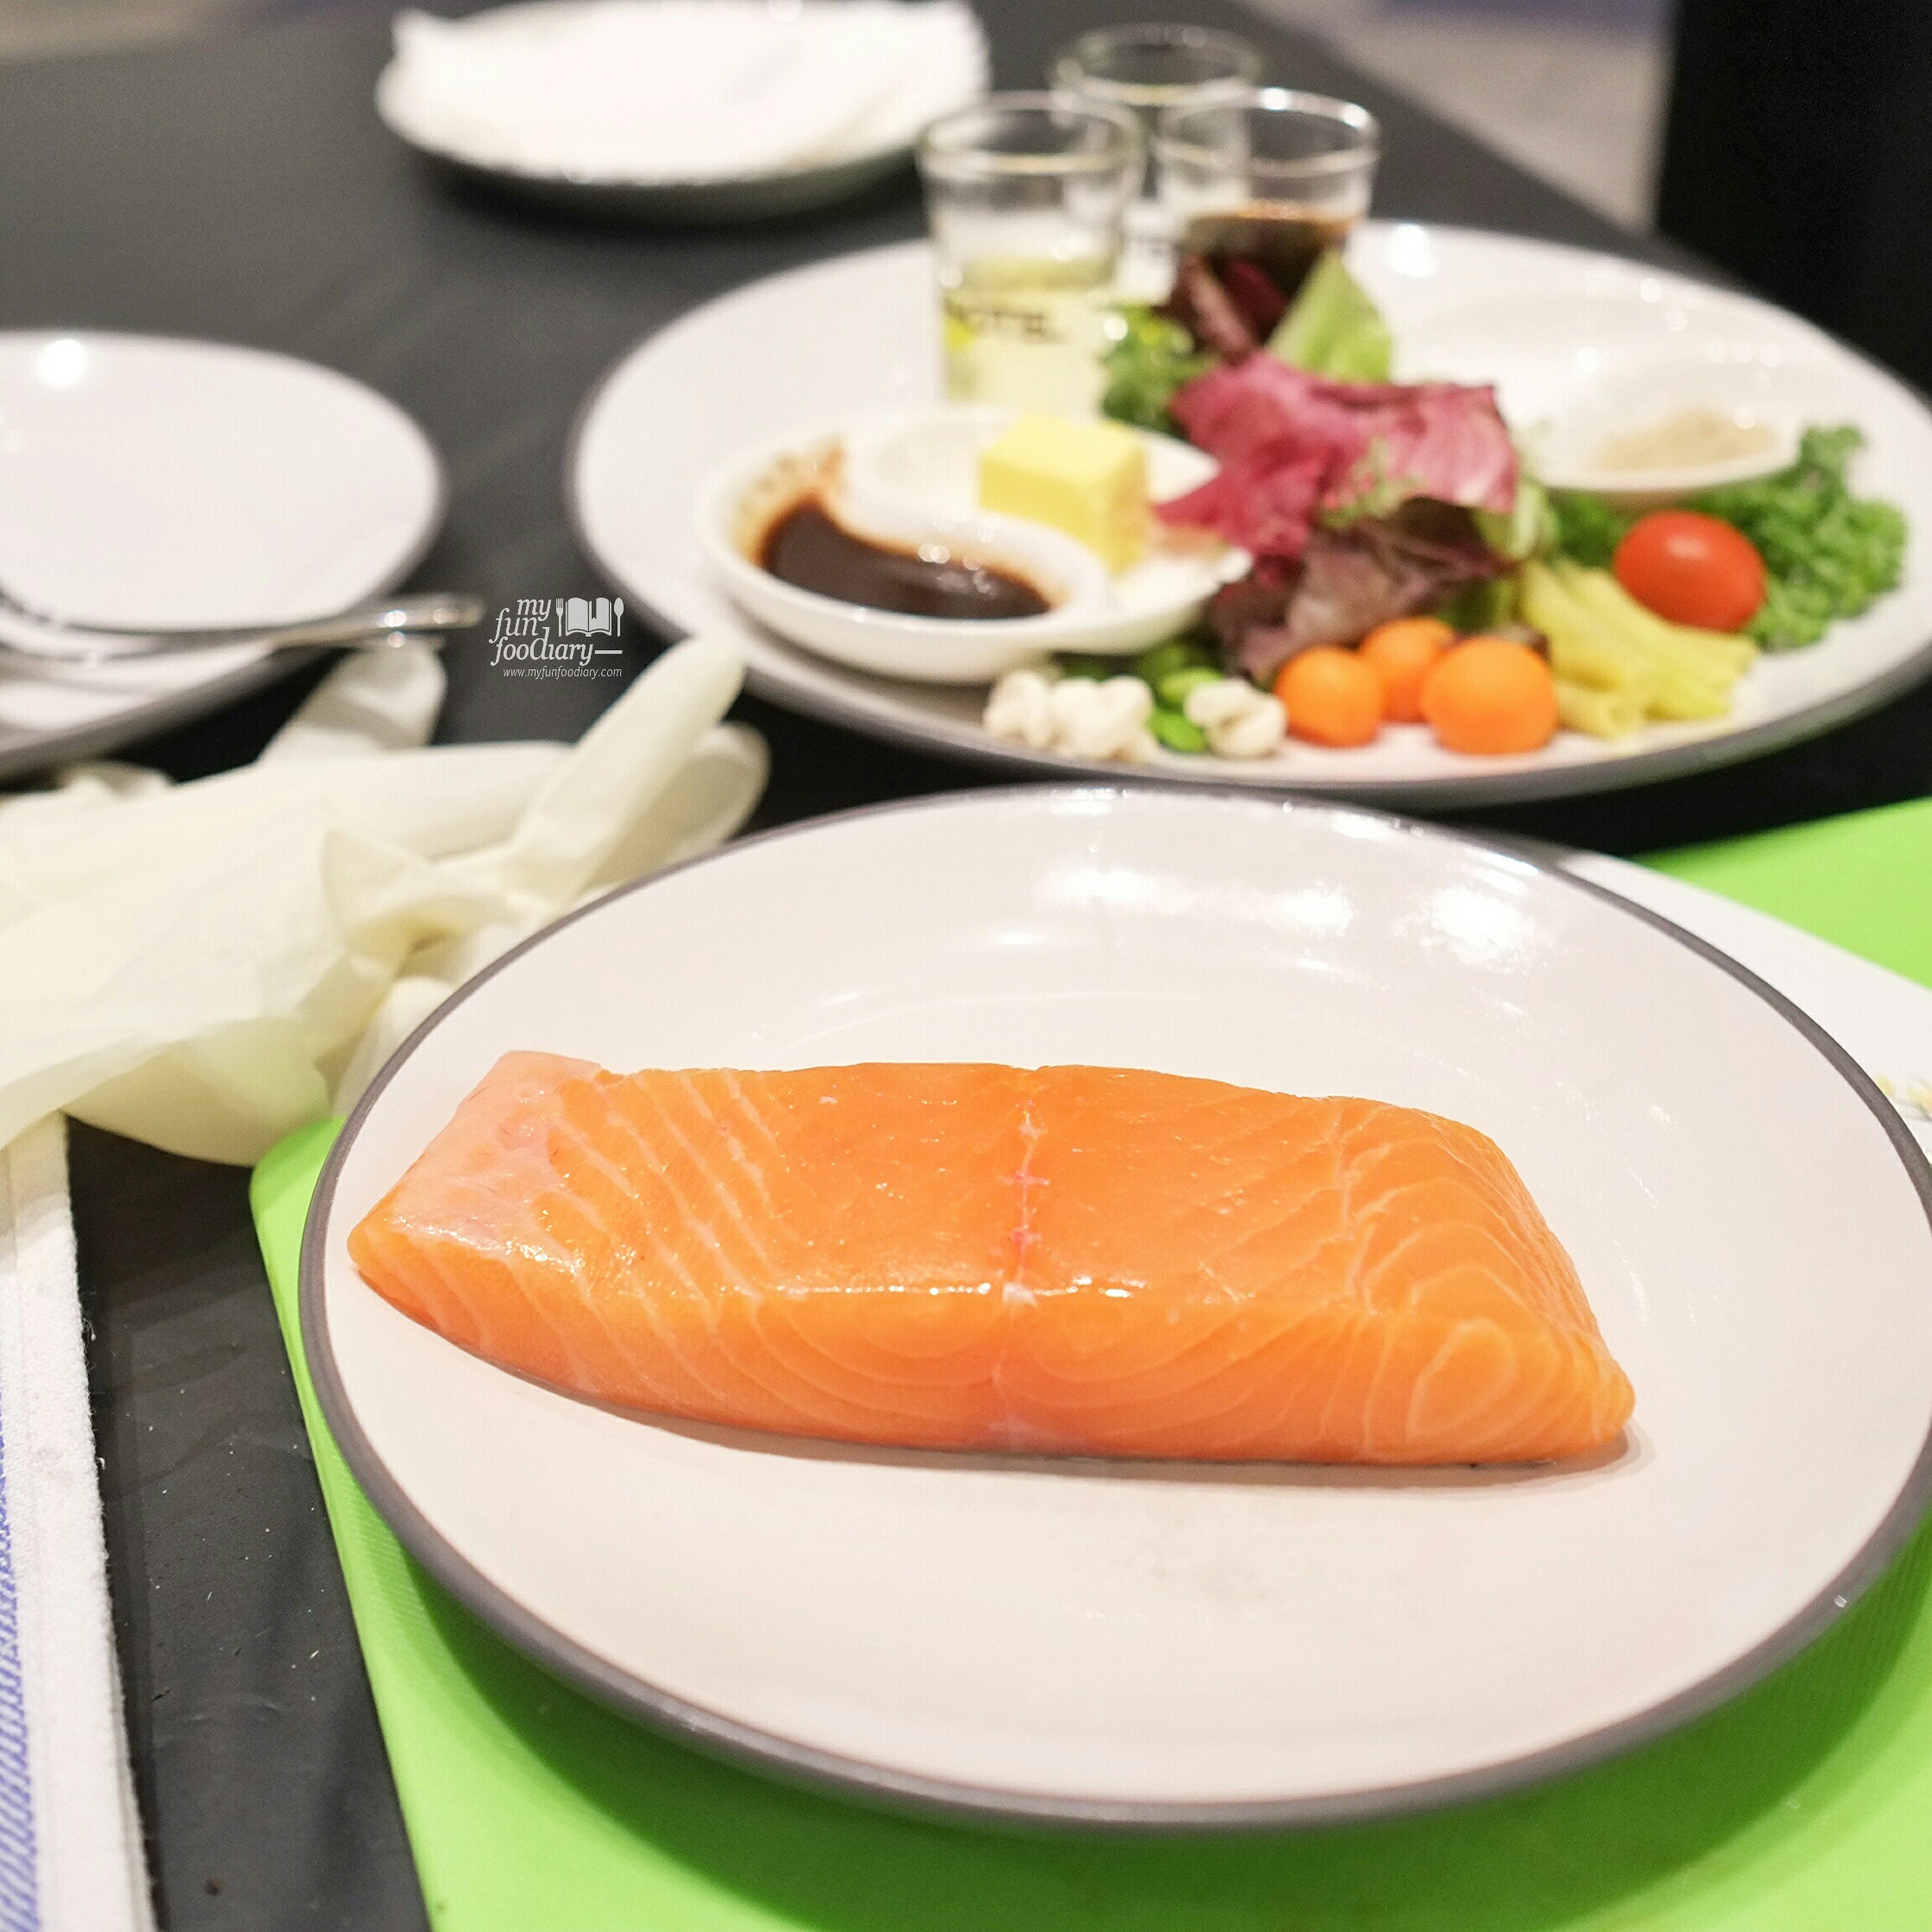 Salmon and Other Ingredients at our Cooking Class with Artotel Thamrin by Myfunfoodiary